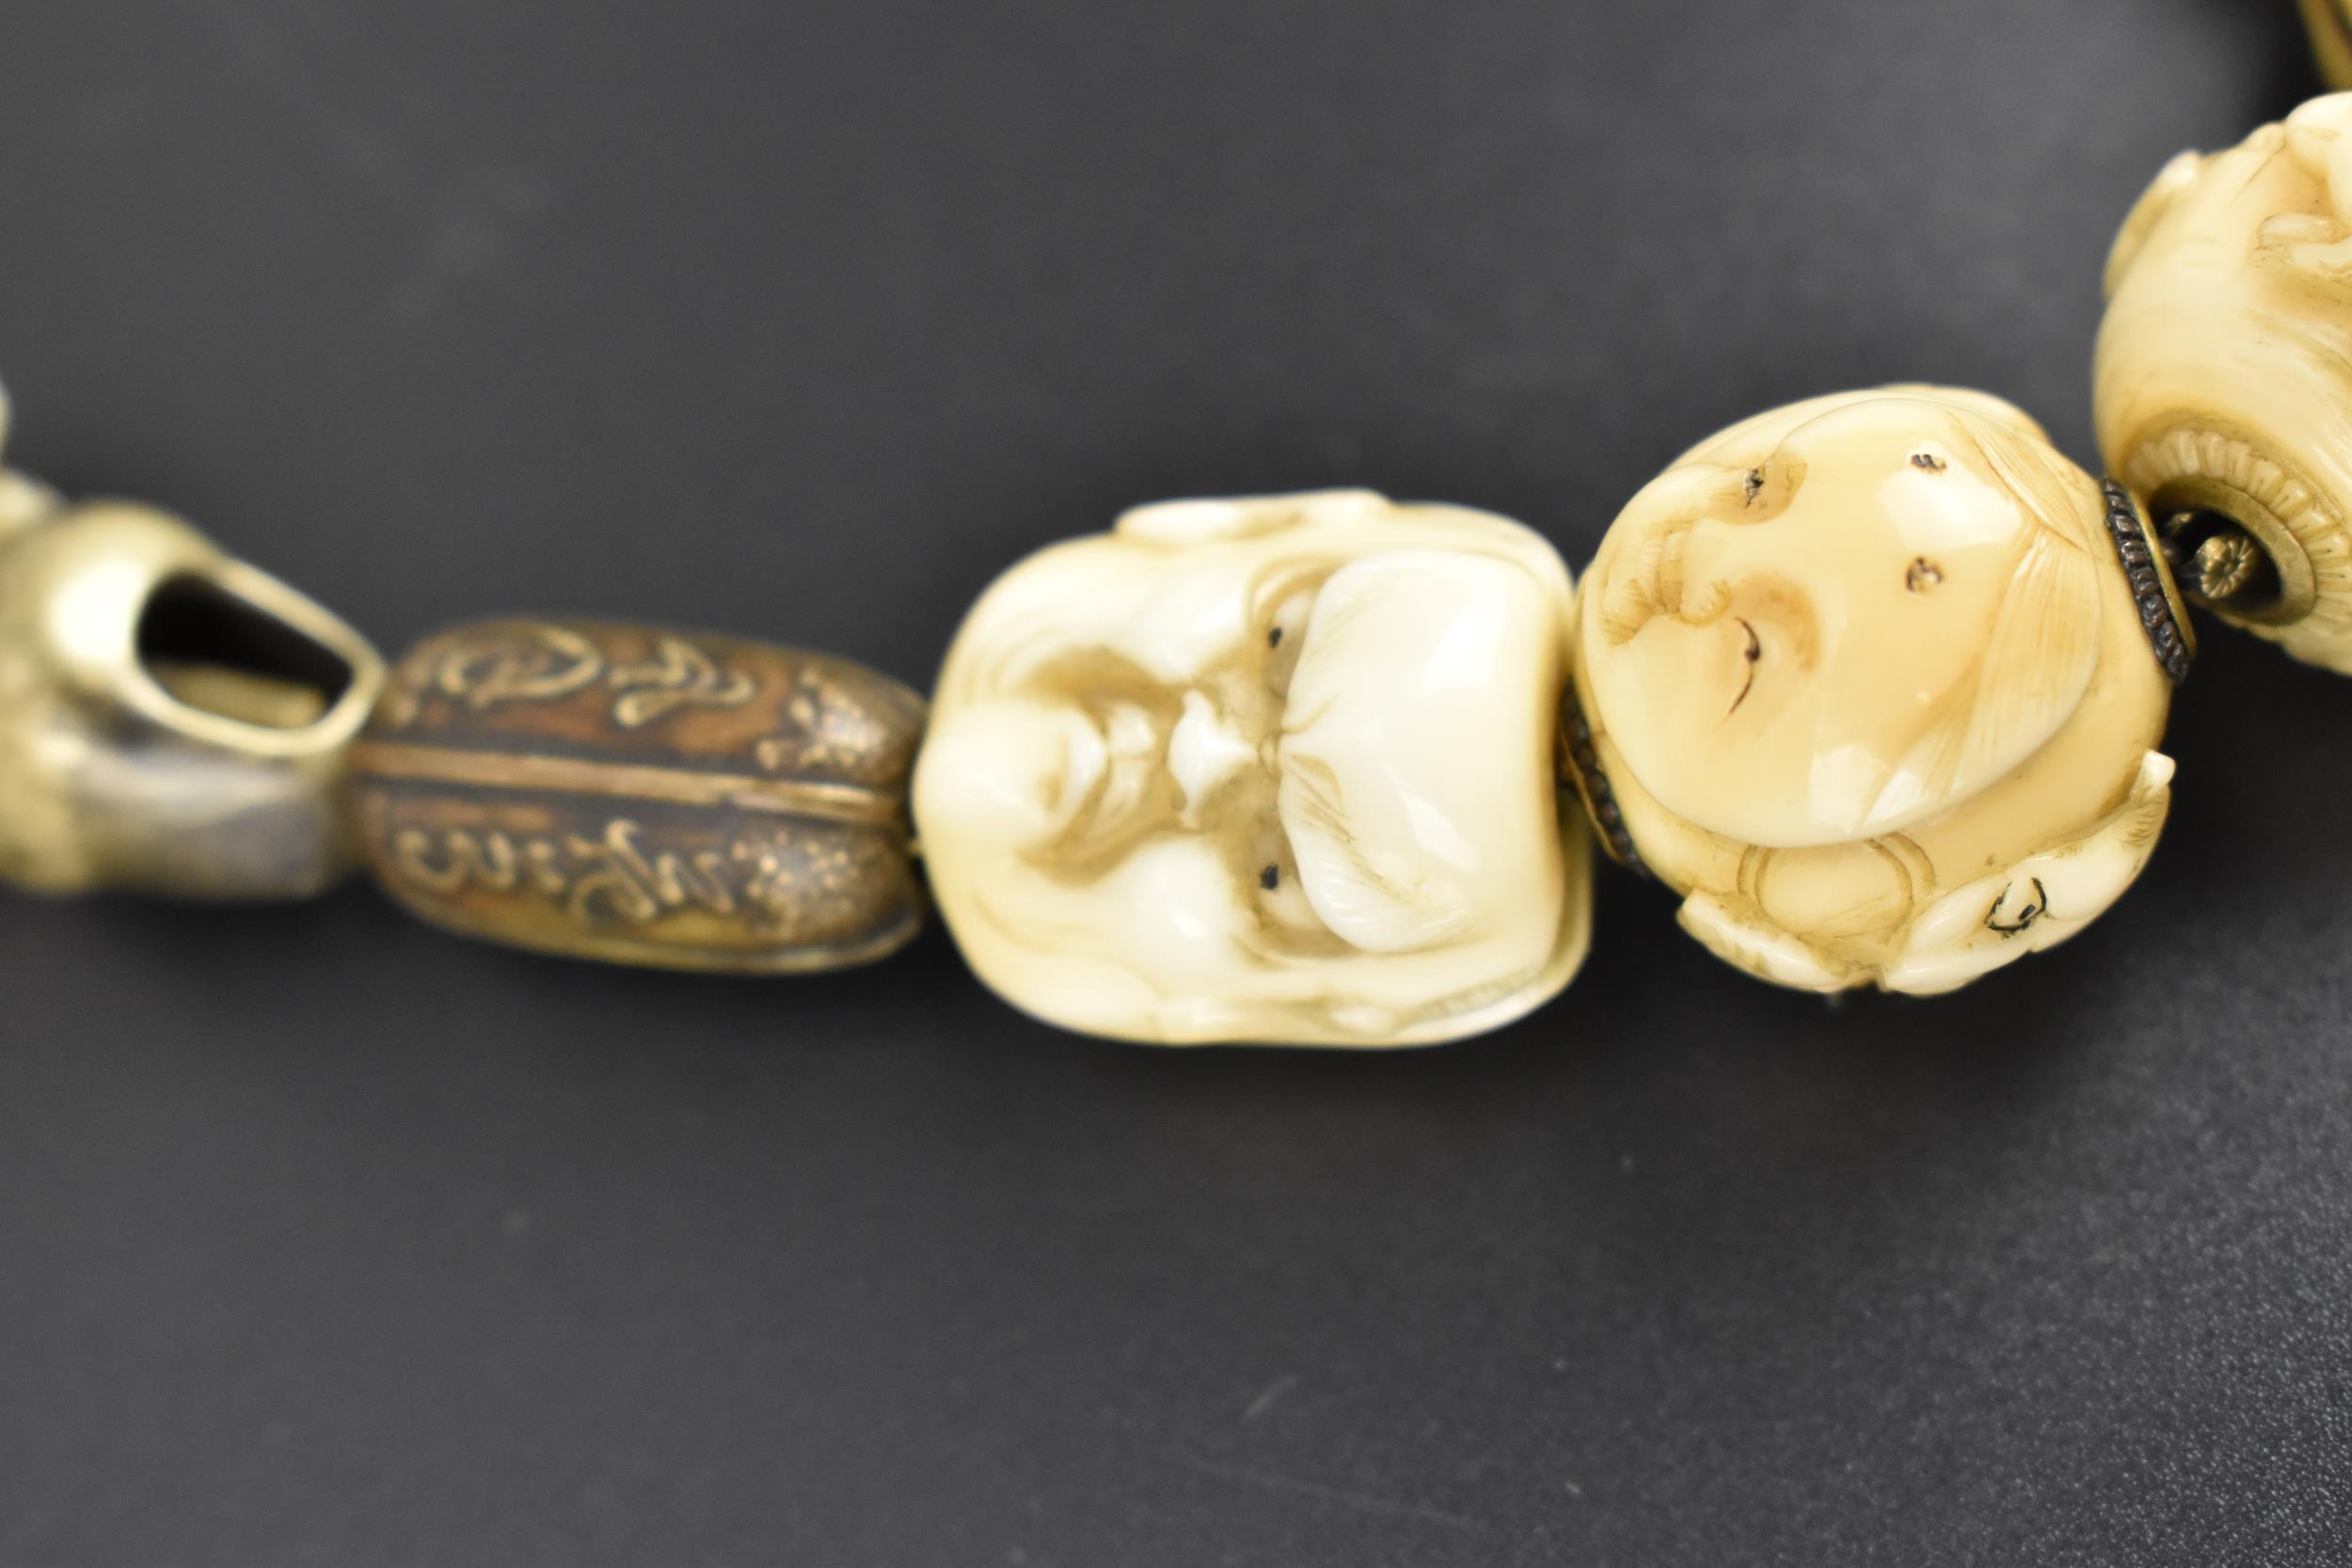 A 19th century Japanese ojime bead necklace, with carved ivory, bone, and metal ojimes, modelled - Bild 4 aus 7